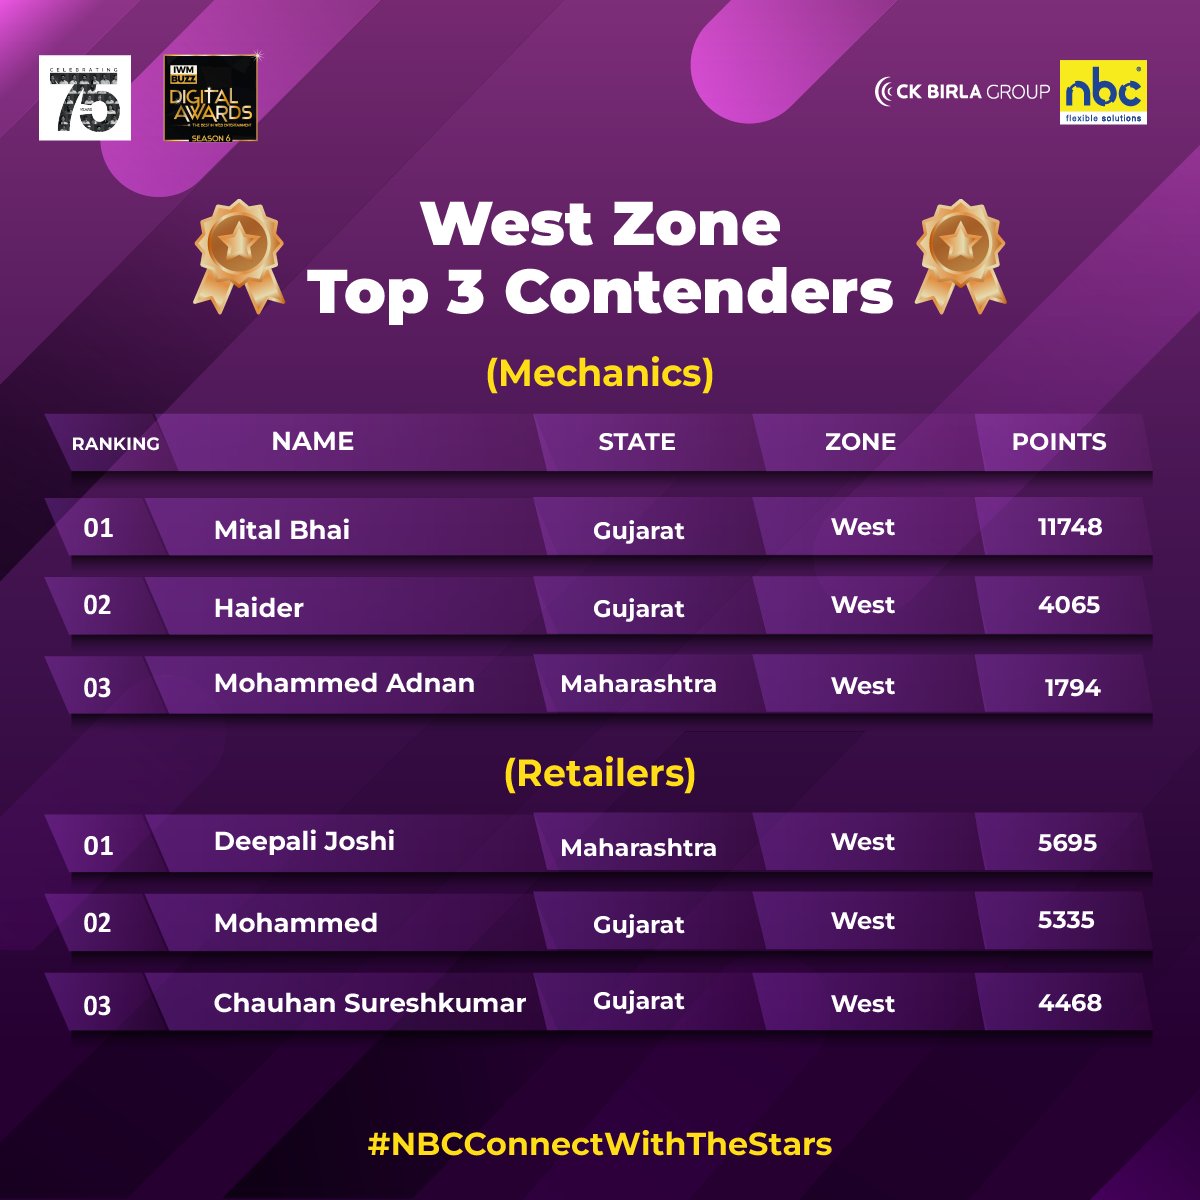 Zone by zone, the stars emerge! 🌟 Discover the top 3 contenders from North, South, East, West, and Central on the #NBCConnectWithTheStars leaderboard. The race is heating up!! Who's leading in your area? #RedCarpet #Leaderboard #Contest #NBCBearings #CKBirlaGroup #Explore